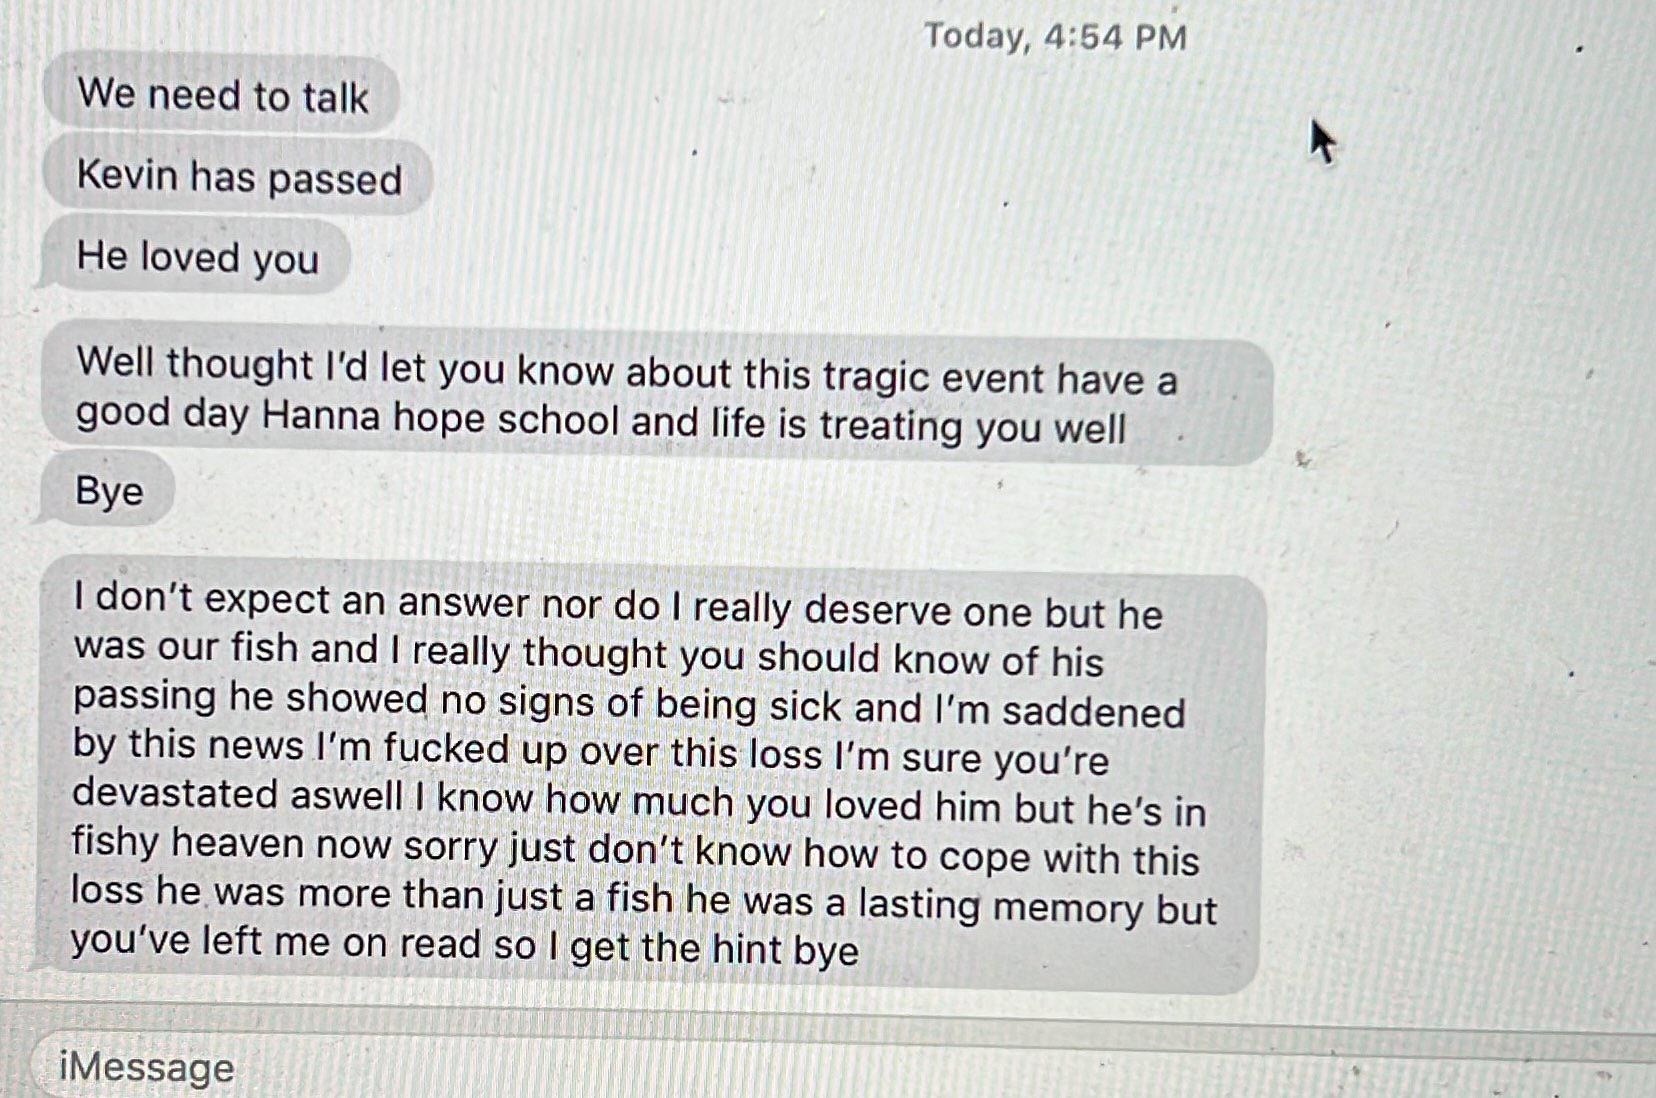 The ex says the fish they owned together has died, doesn&#x27;t get a response, then goes on a long rant that ends with saying he was more than a fish, he was a lasting memory of their relationship